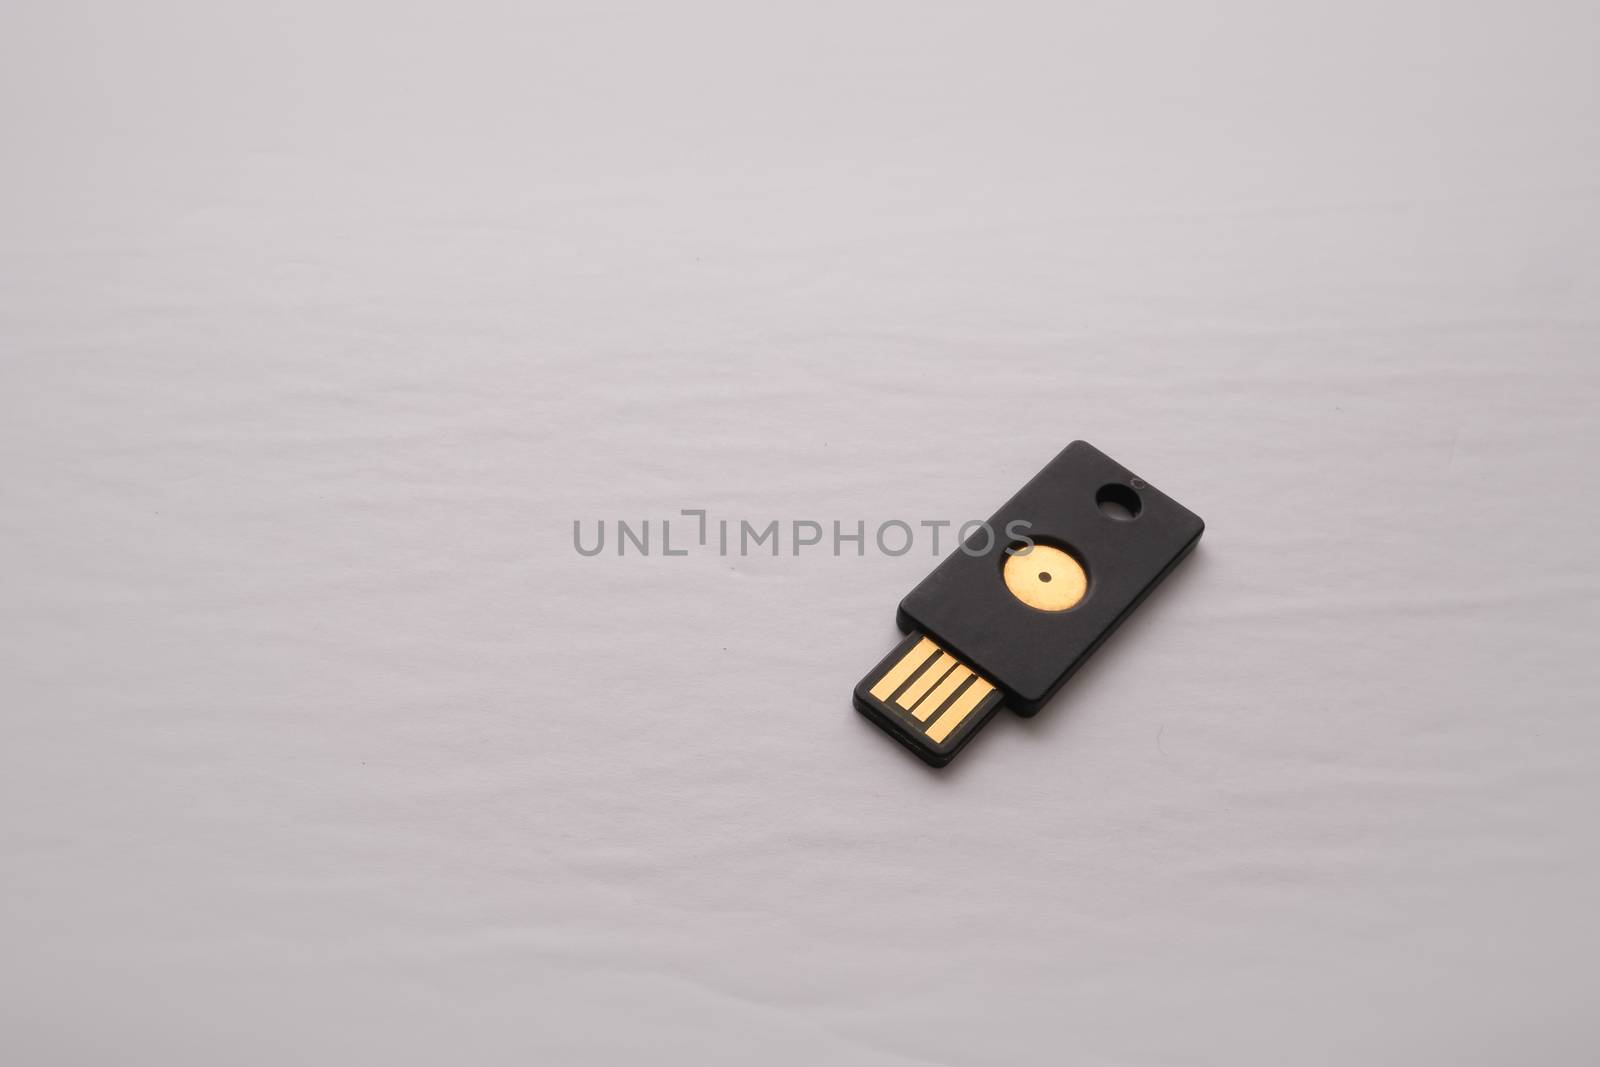 USB Key for 2-Factor Authentication by colintemple